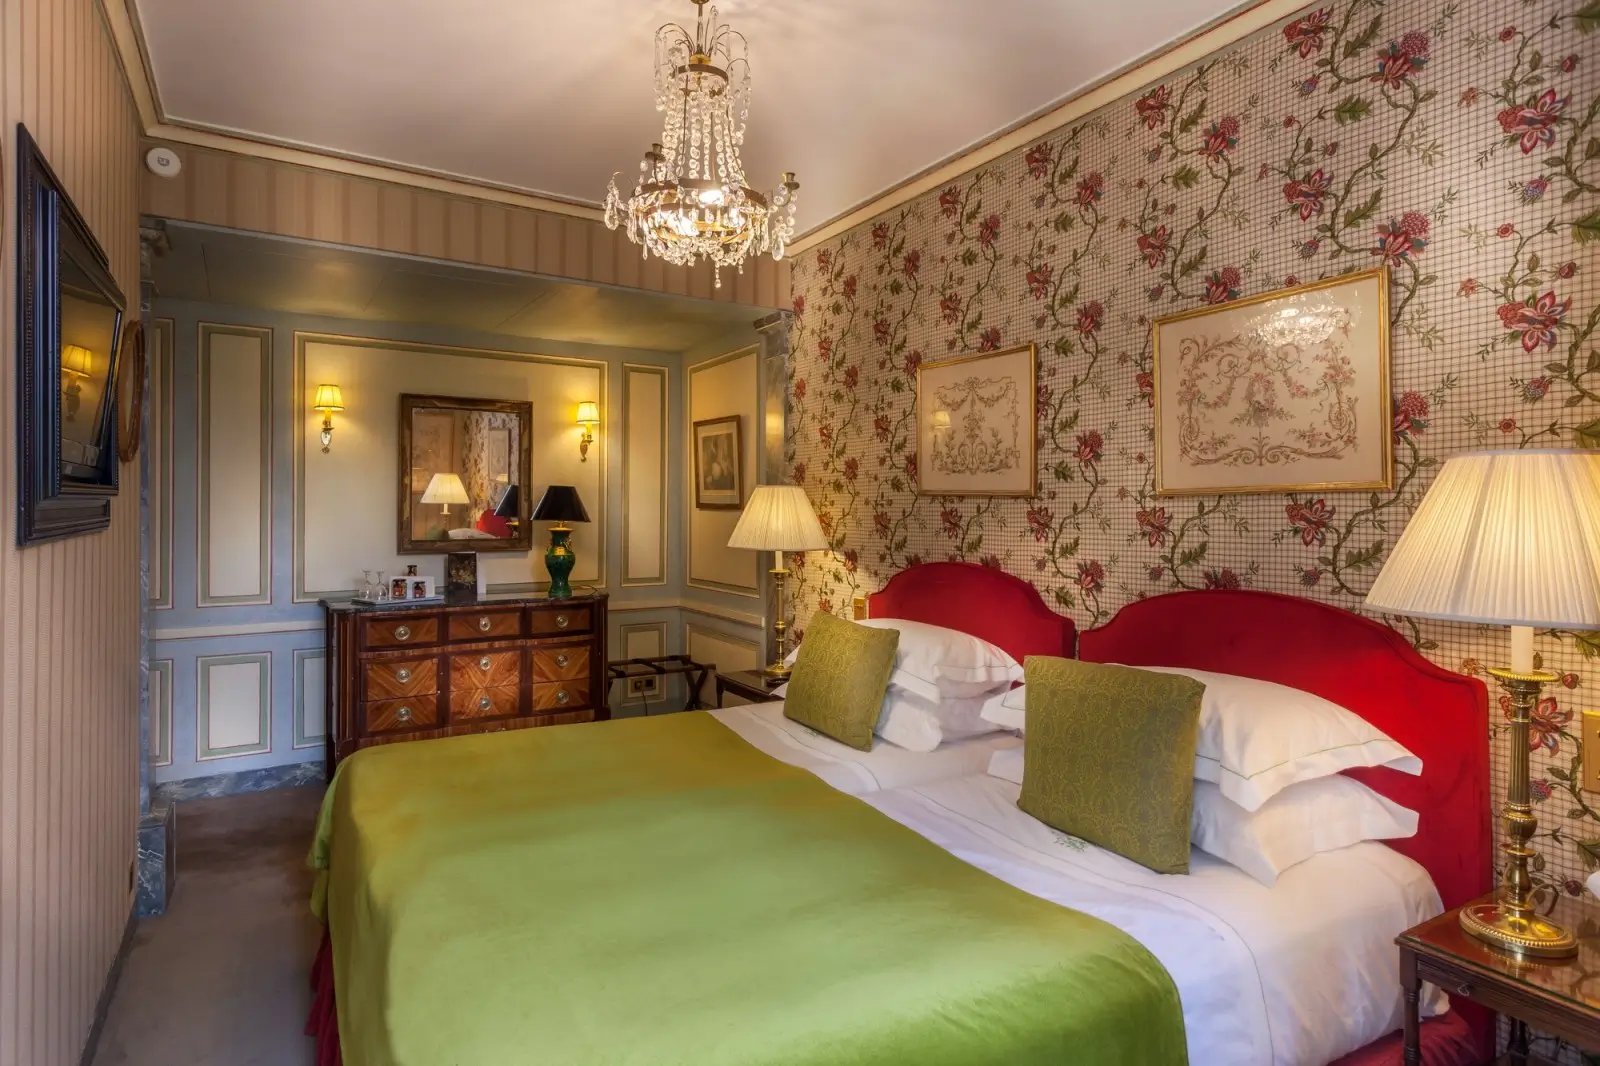 Classic Parisian charm in an eco-friendly setting at Hotel Duc de Saint Simon, featuring a luxurious bedroom with vintage floral wallpaper, a chandelier, and plush red and green bedding.